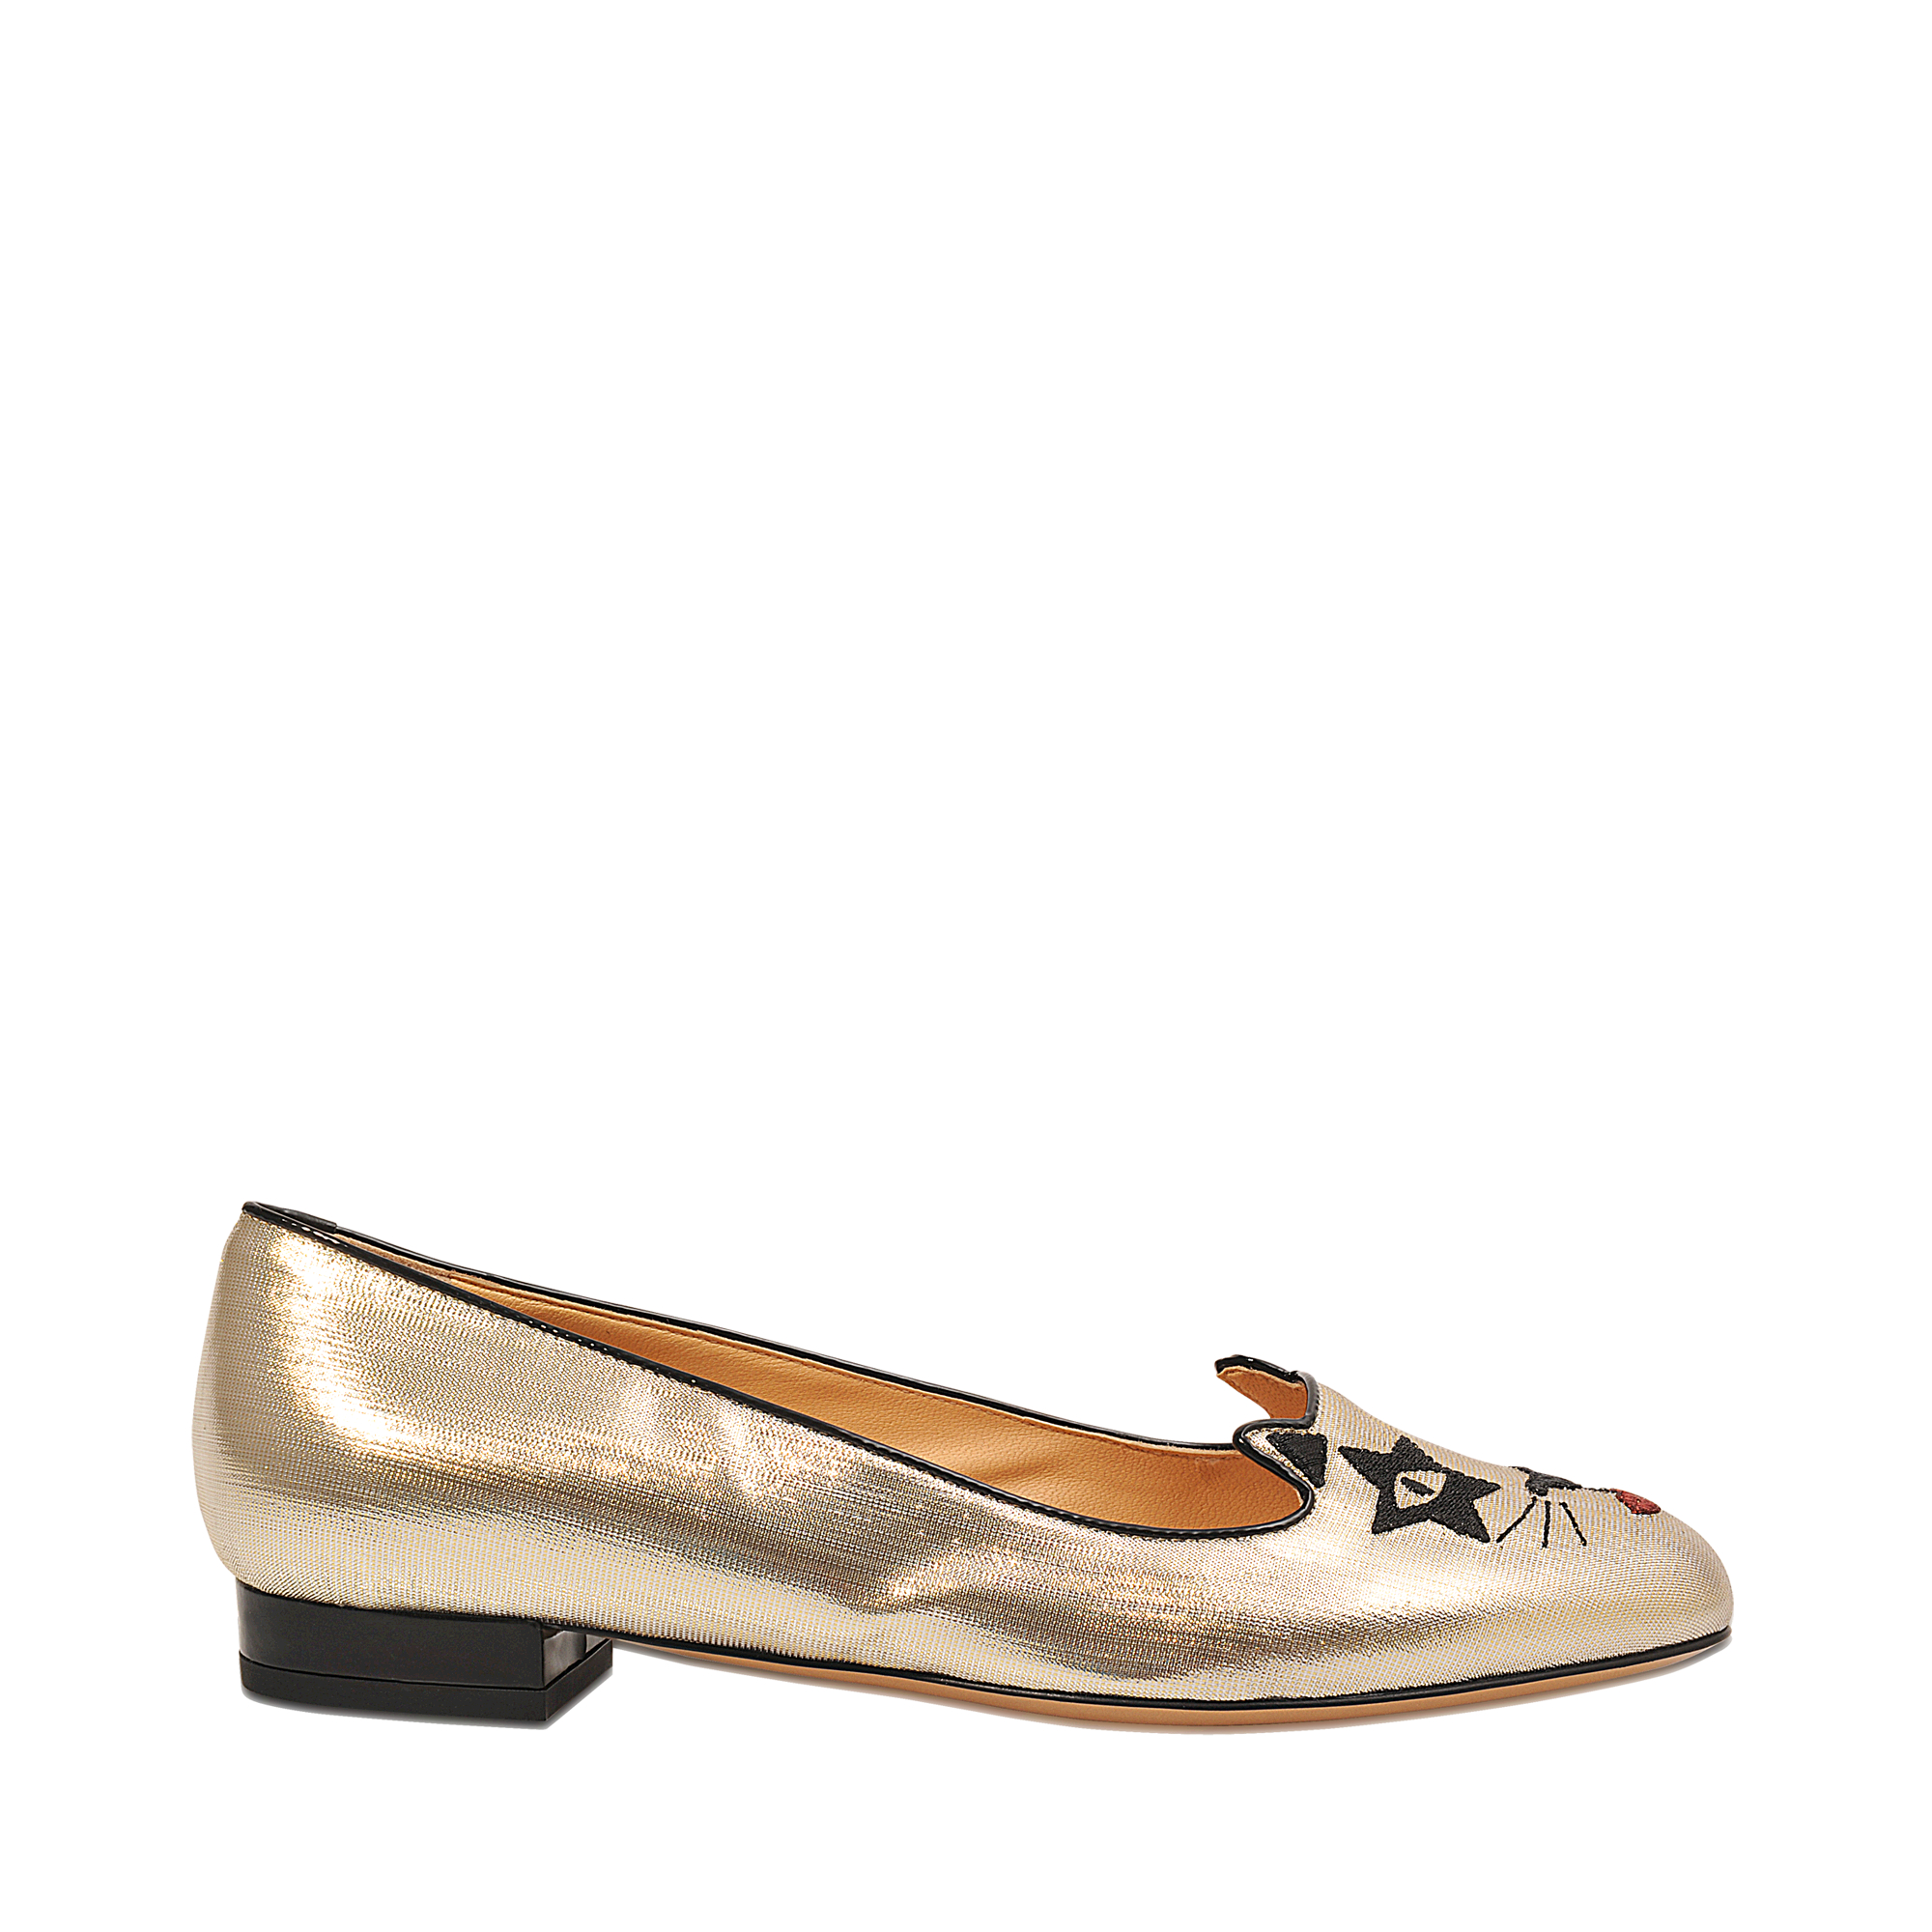 Charlotte olympia Kiss Kitty Lame Ballerina in Gold | Lyst